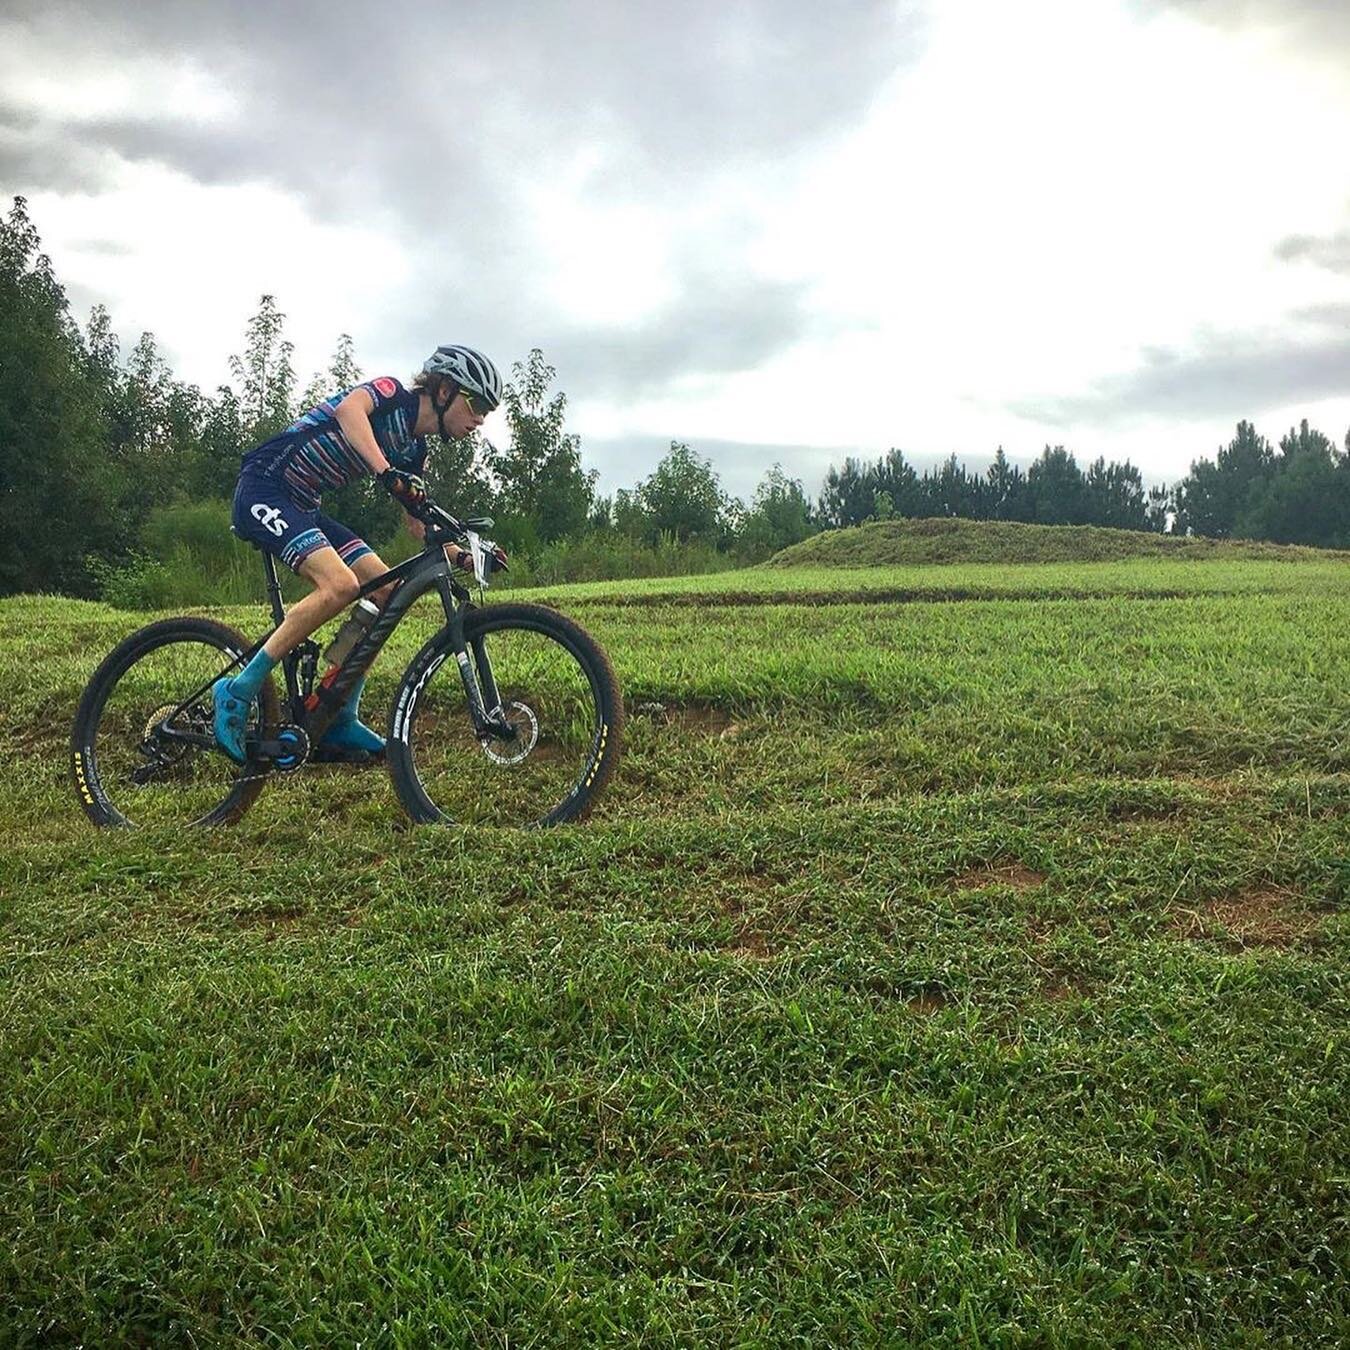 Congrats to junior racer @elyclarkmtb for his consistently impressive results in the Pro/1 mountain bike race categories! He earned 7th place this past weekend in the @canecreekcup race at Mazeppa Park. He&rsquo;ll be racing at the one next weekend t